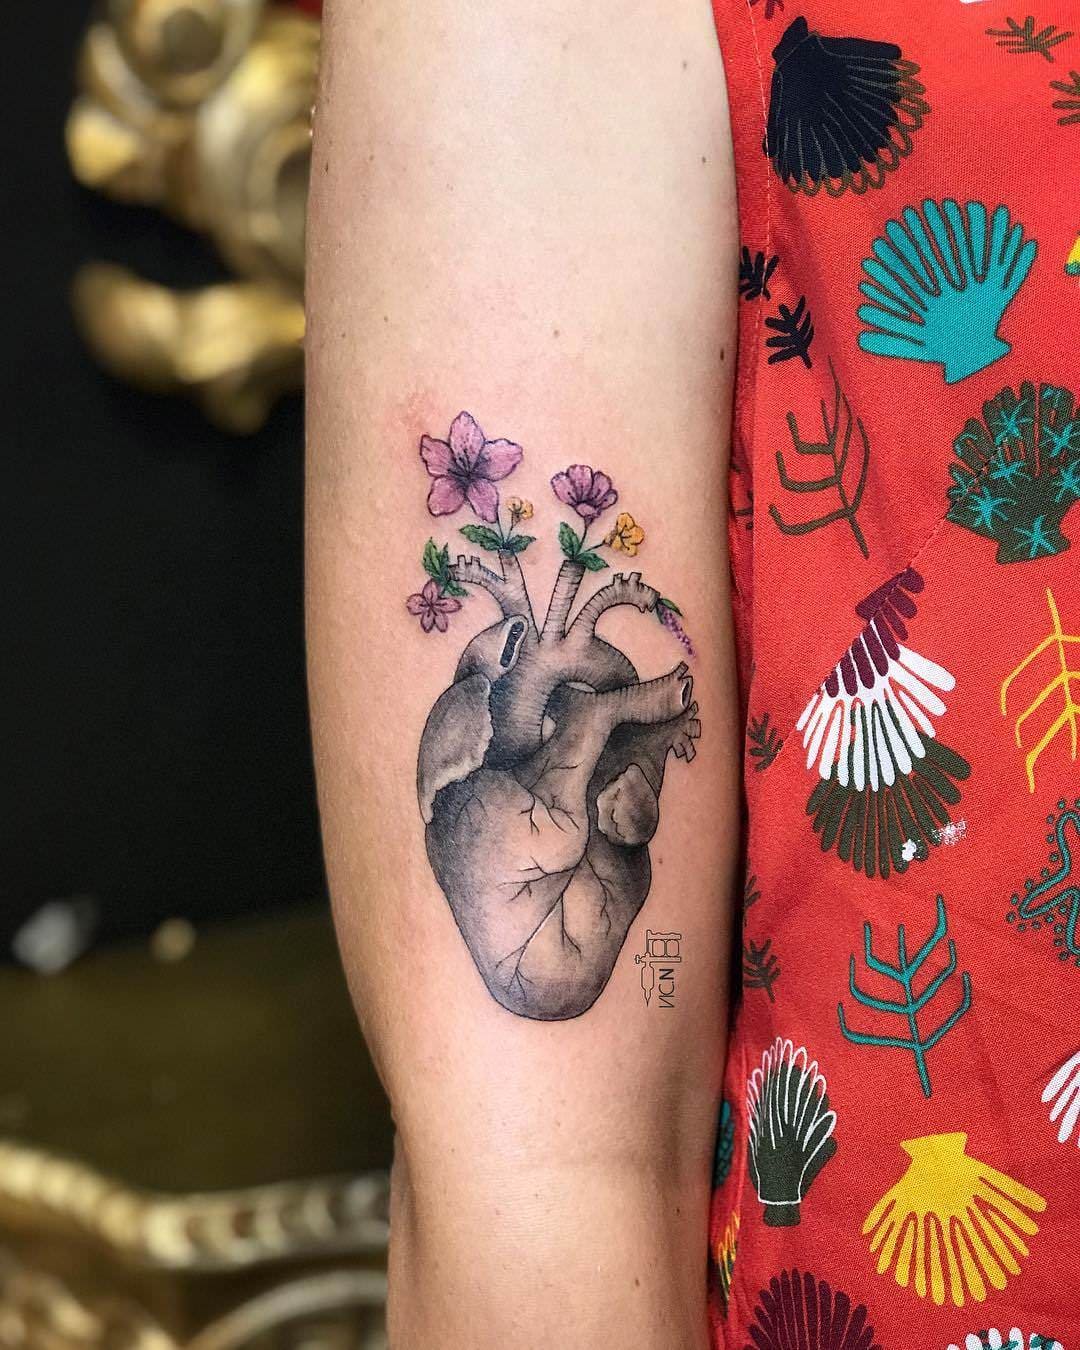 Heart Evangelistas New Ring Tattoo Is So So Pretty